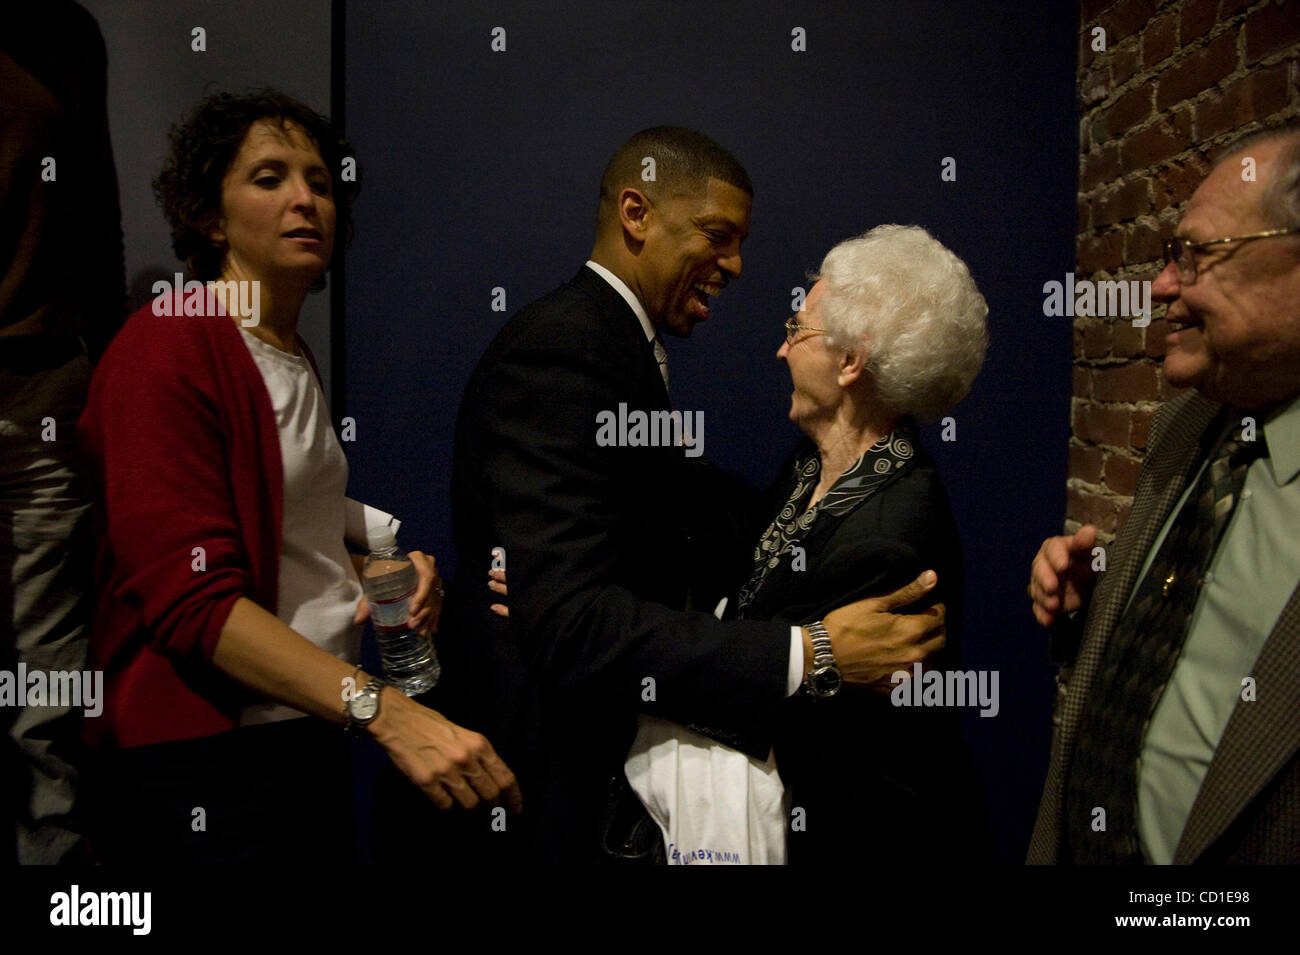 Frances Collings (cq), wife of former Raley's CEO Charles Collings, embraces Kevin Johnson, who announced his candidacy for the position of Sacramento Mayor at the Guild Theater in Oak Park on Wednesday afternoon. Photography by Jose Luis Villegas, jvillegas@sacbee.com March 05, 2008 Stock Photo